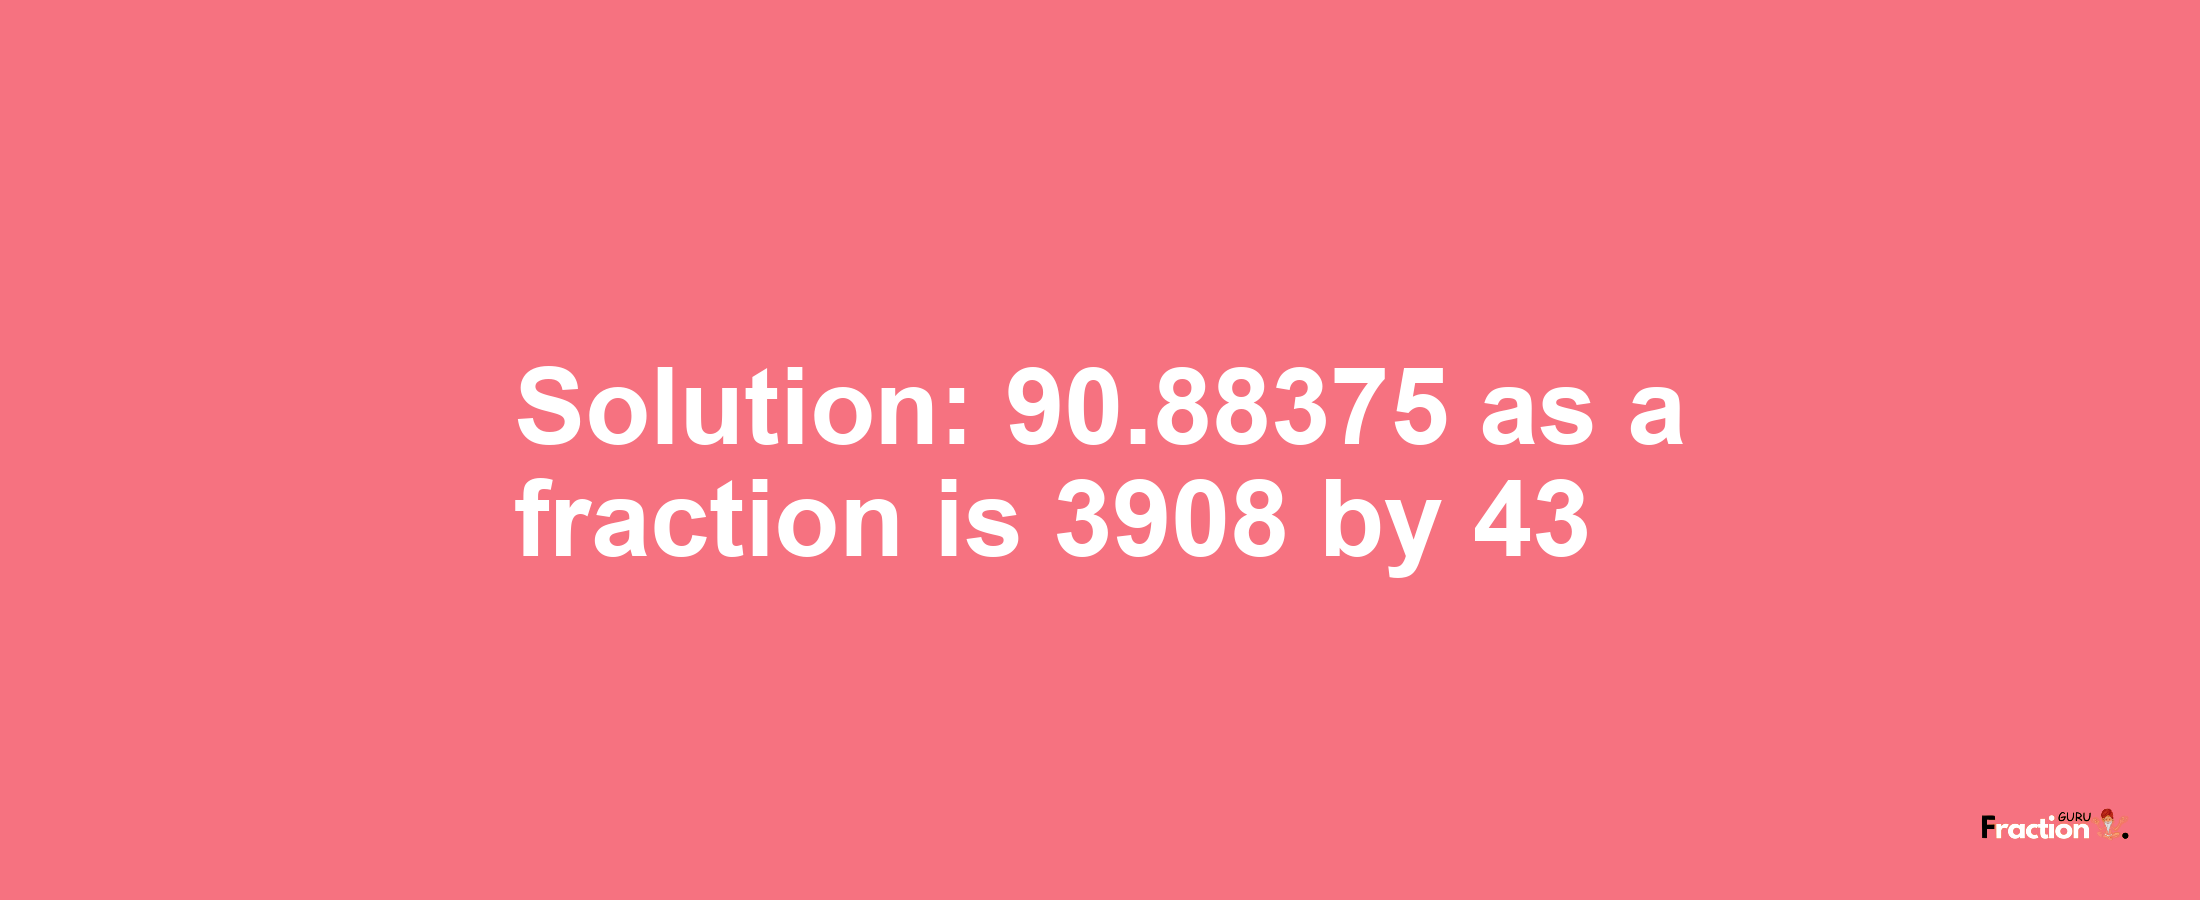 Solution:90.88375 as a fraction is 3908/43